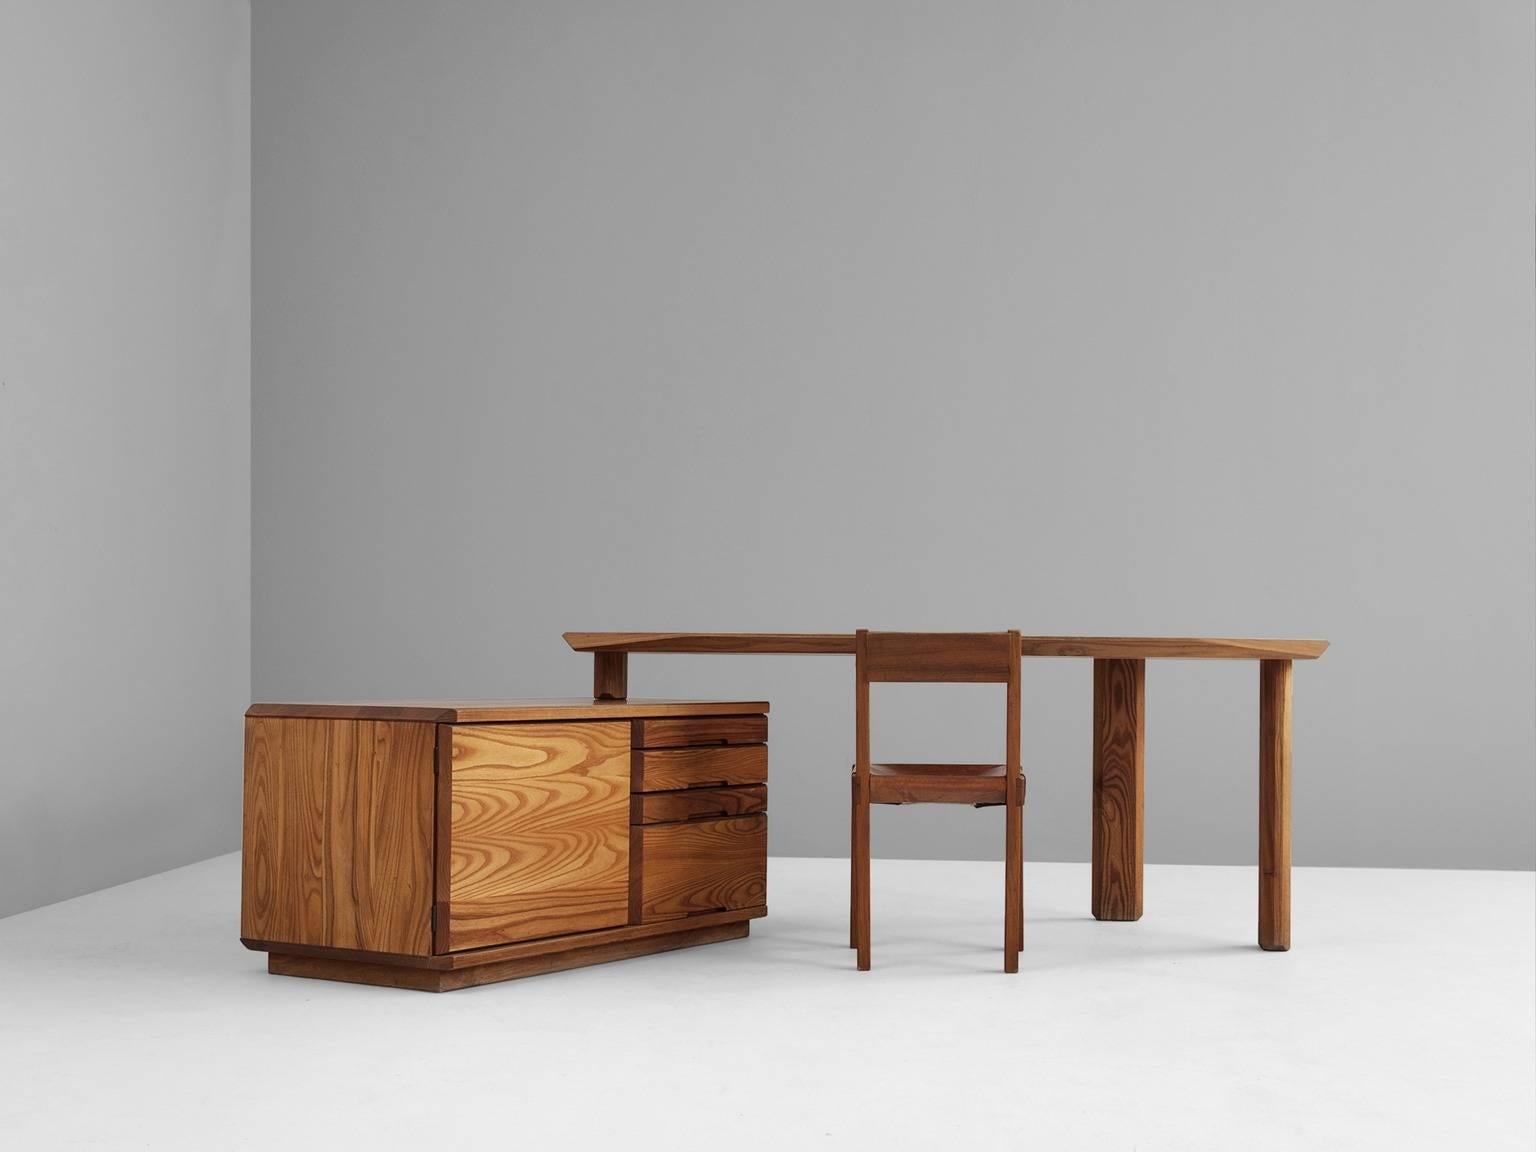 Desk, in solid elm by Pierre Chapo, France, 1960s.

Characteristic desk by French designer and carpenter Pierre Chapo. Eye-catching detail is the beautiful and expressive grain of the elmwood, visible on the entire item. Stunning polygonal table